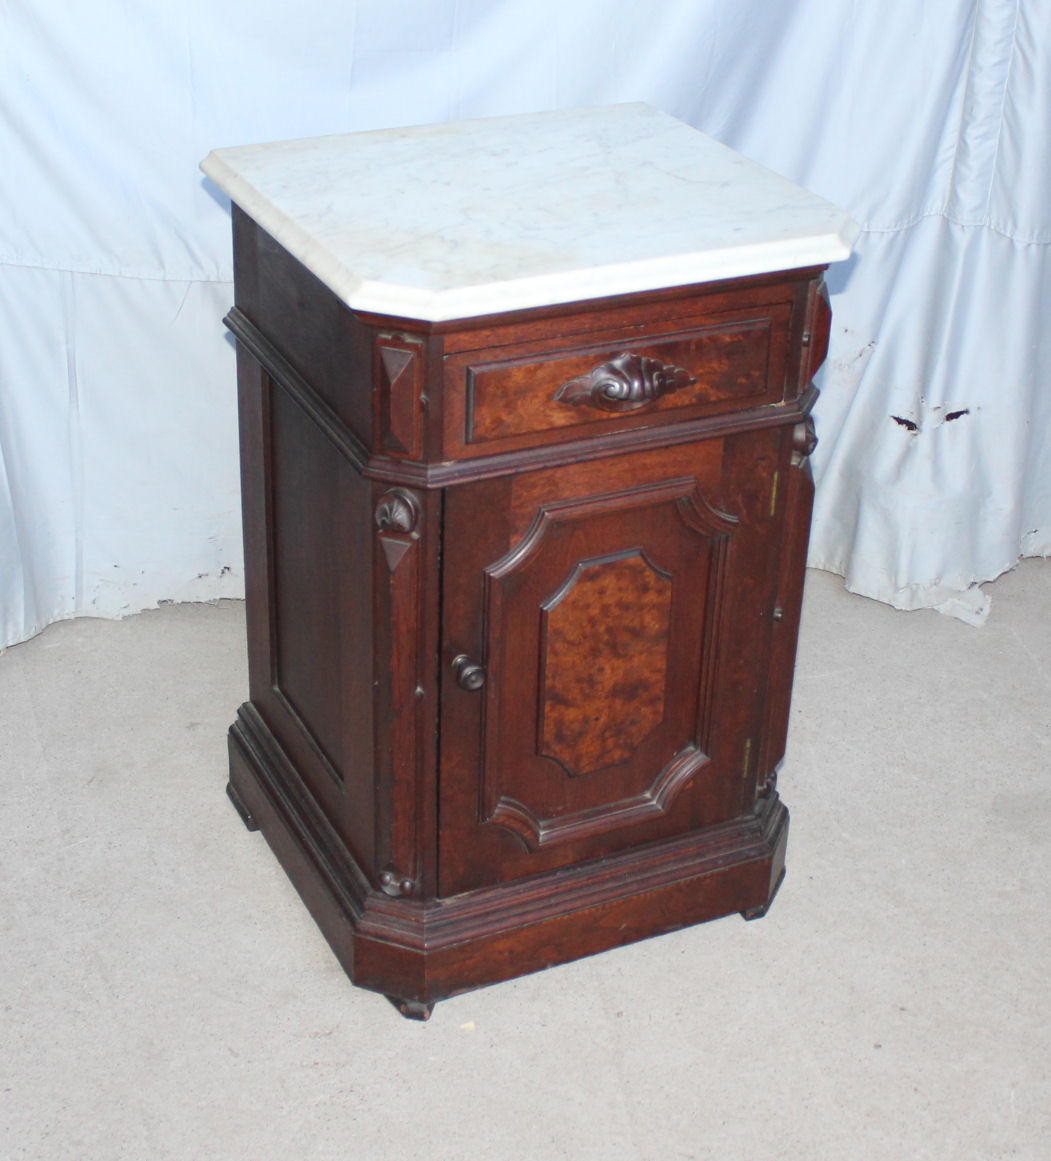 Bargain John S Antiques Antique Victorian Walnut Marble Top Half Commode Night Stand Bargain John S Antiques